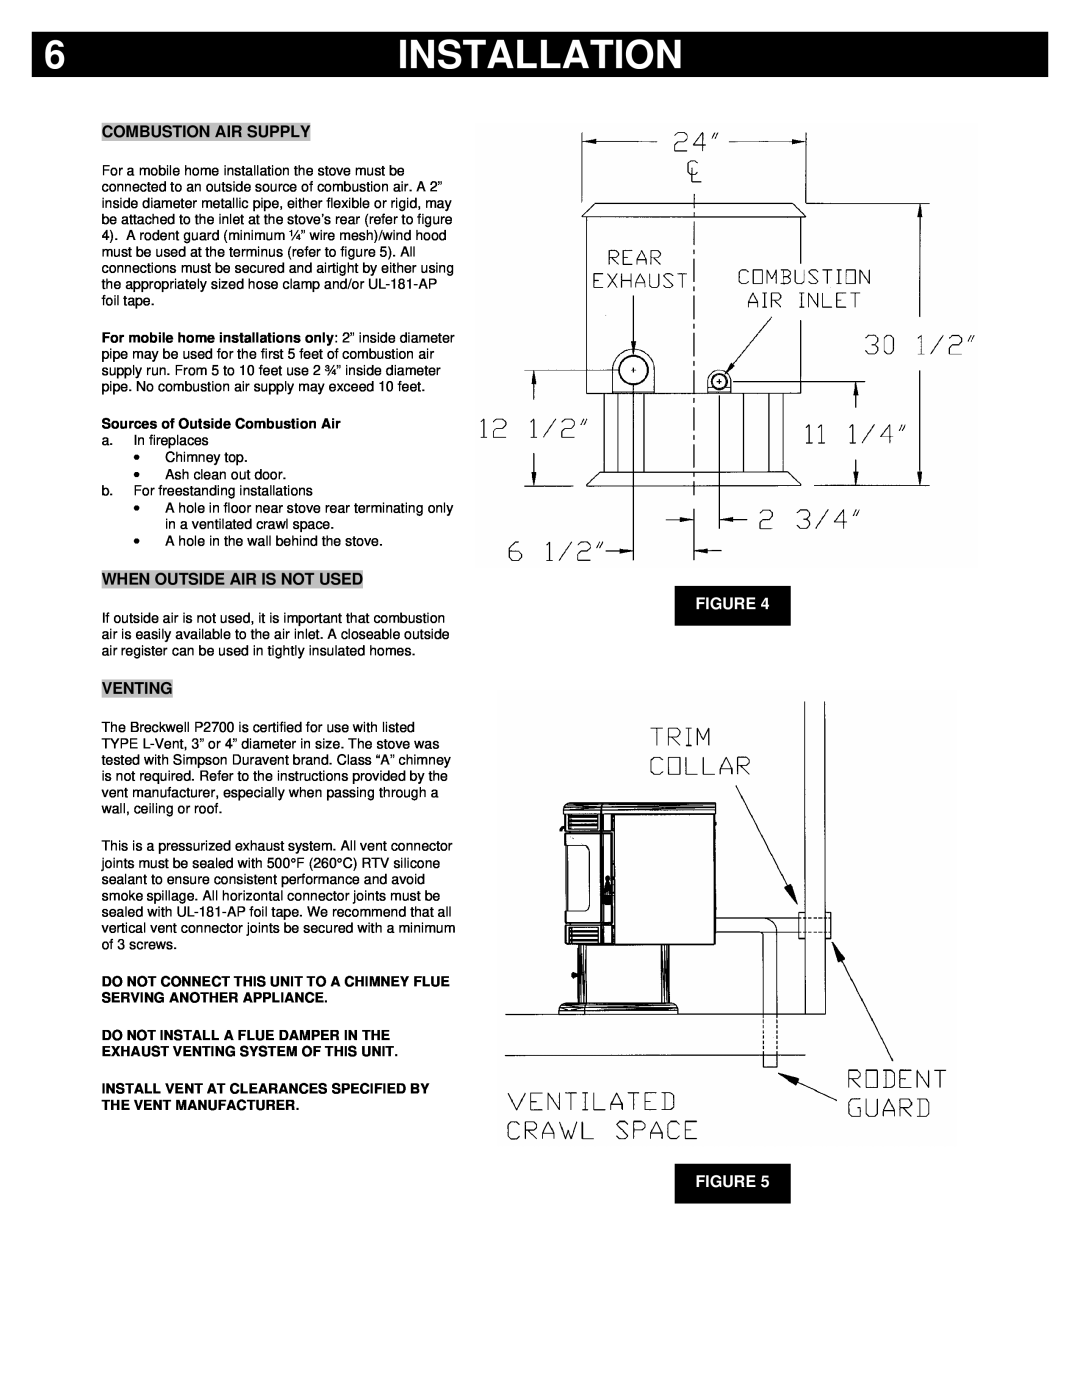 Breckwell P2700 owner manual INSTALLATION9, Combustion Air Supply, When Outside Air Is Not Used, Venting, Figure Figure 